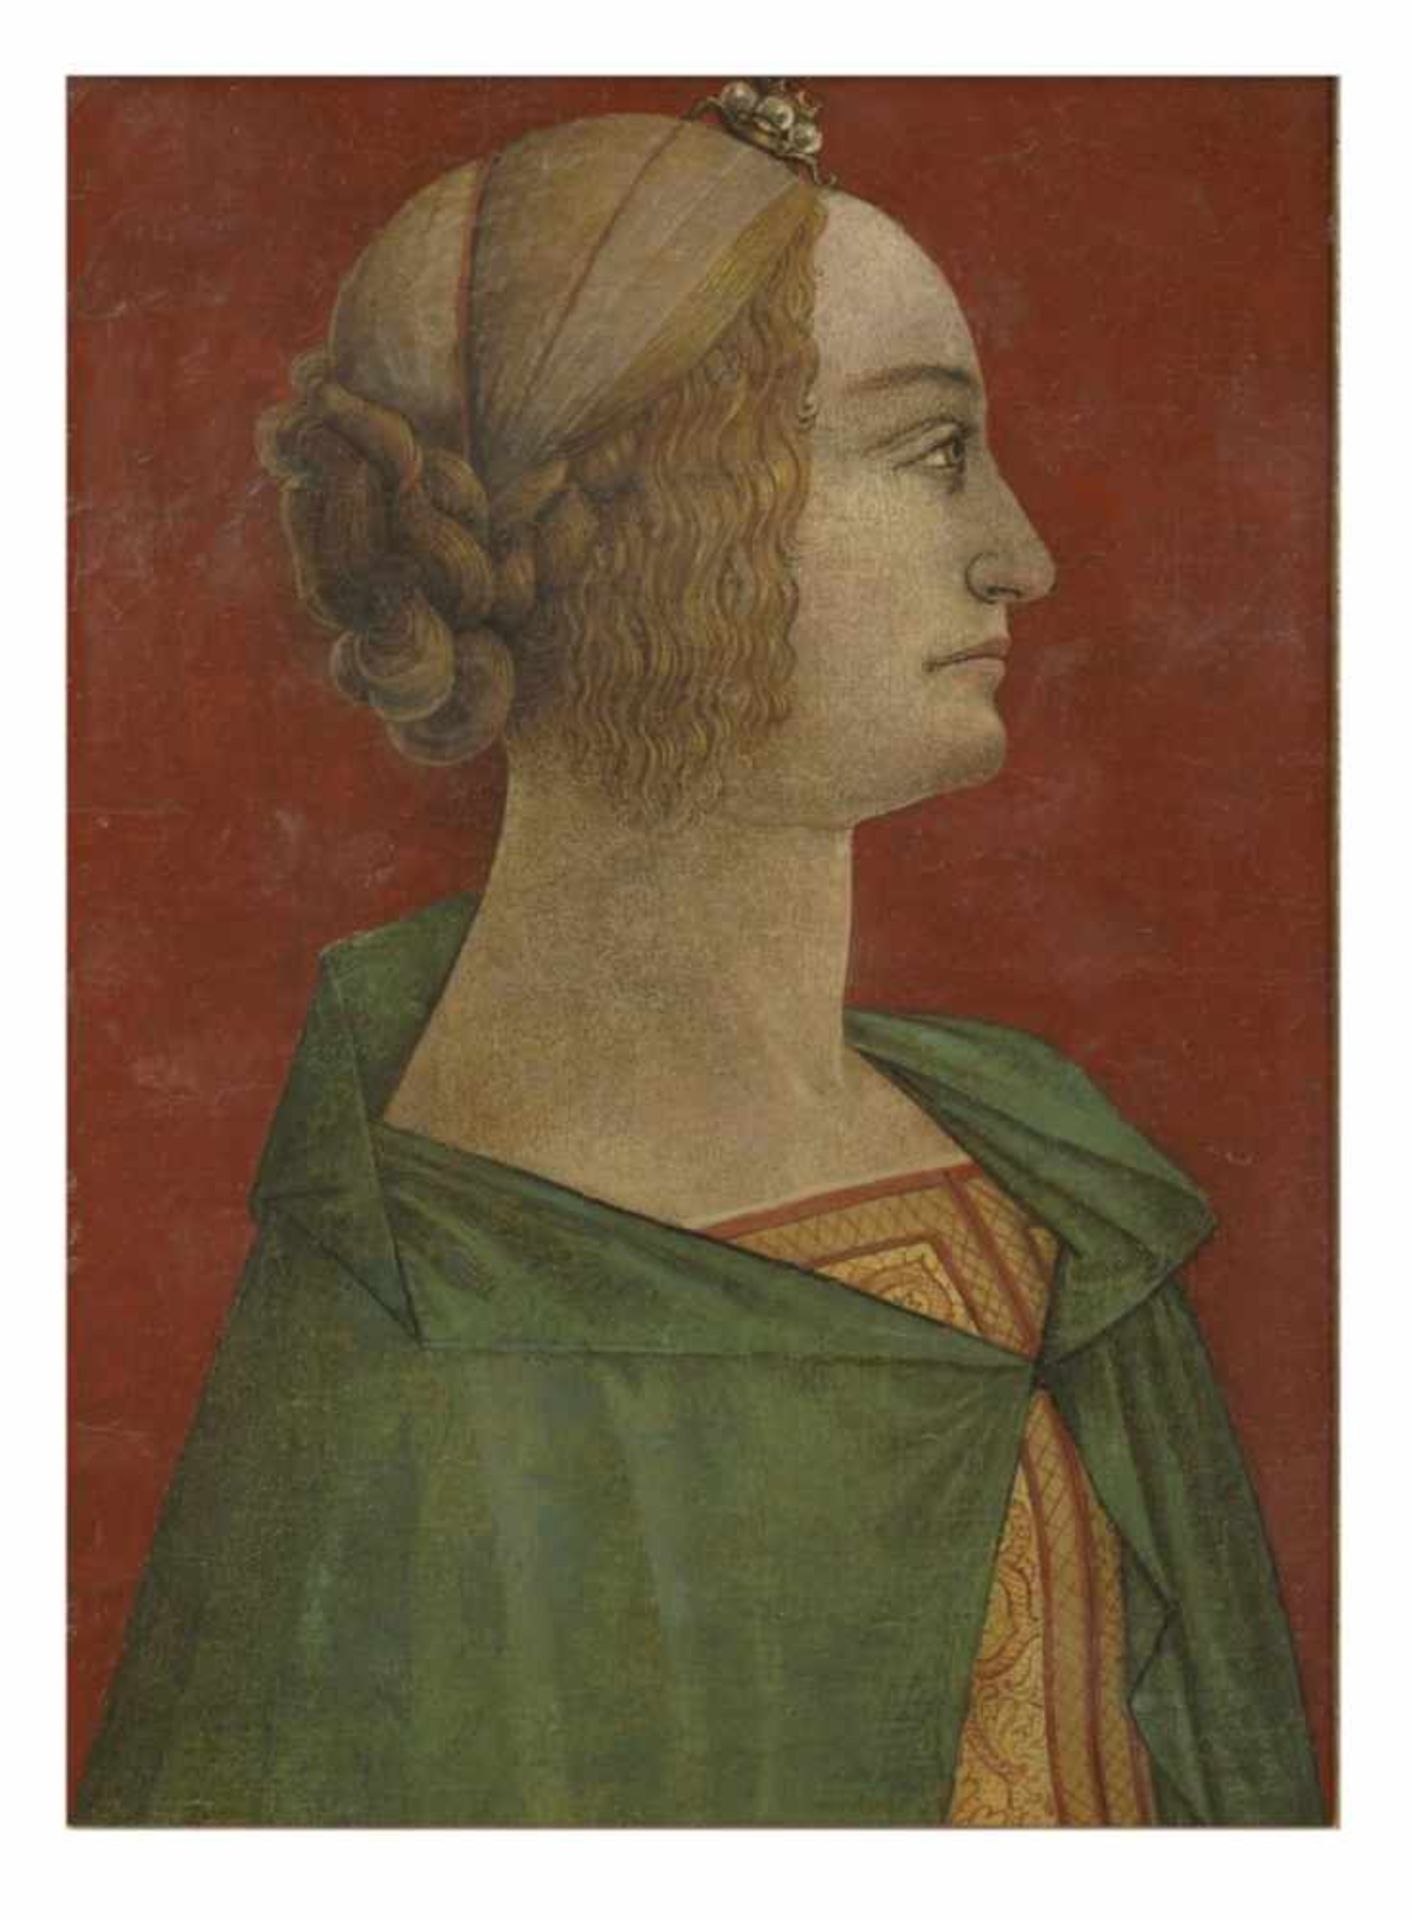 Unknown painter, Lady of the Court, Italy (?), Tempera on panel, probably 16th c., 34 x 25